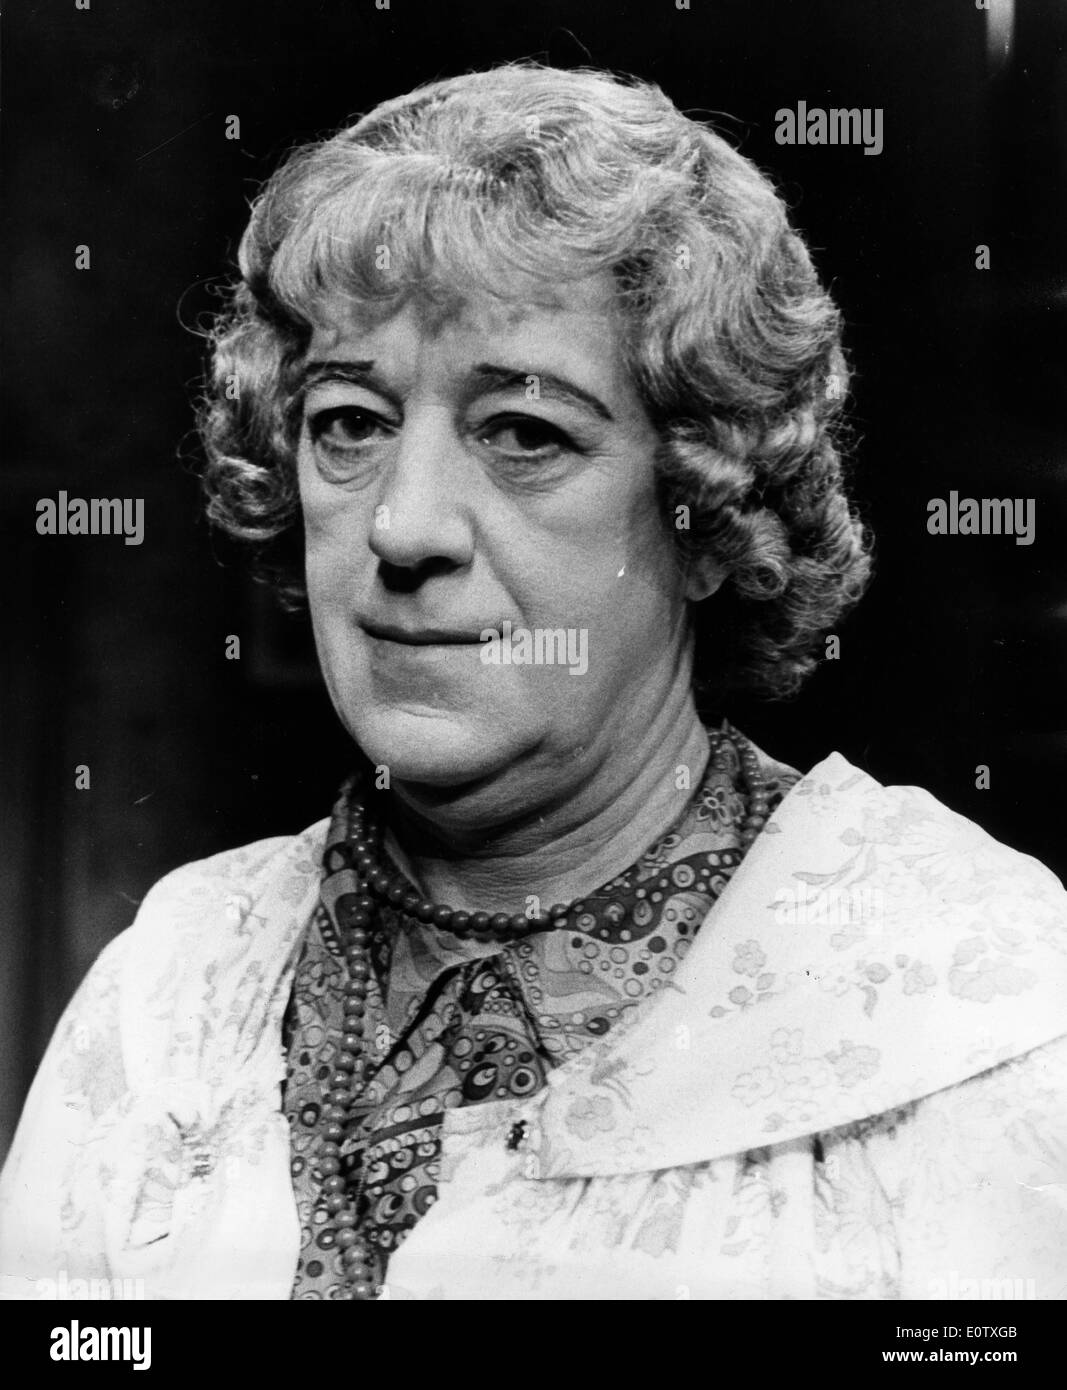 Actor Alec Guinness dressed up as a woman Stock Photo